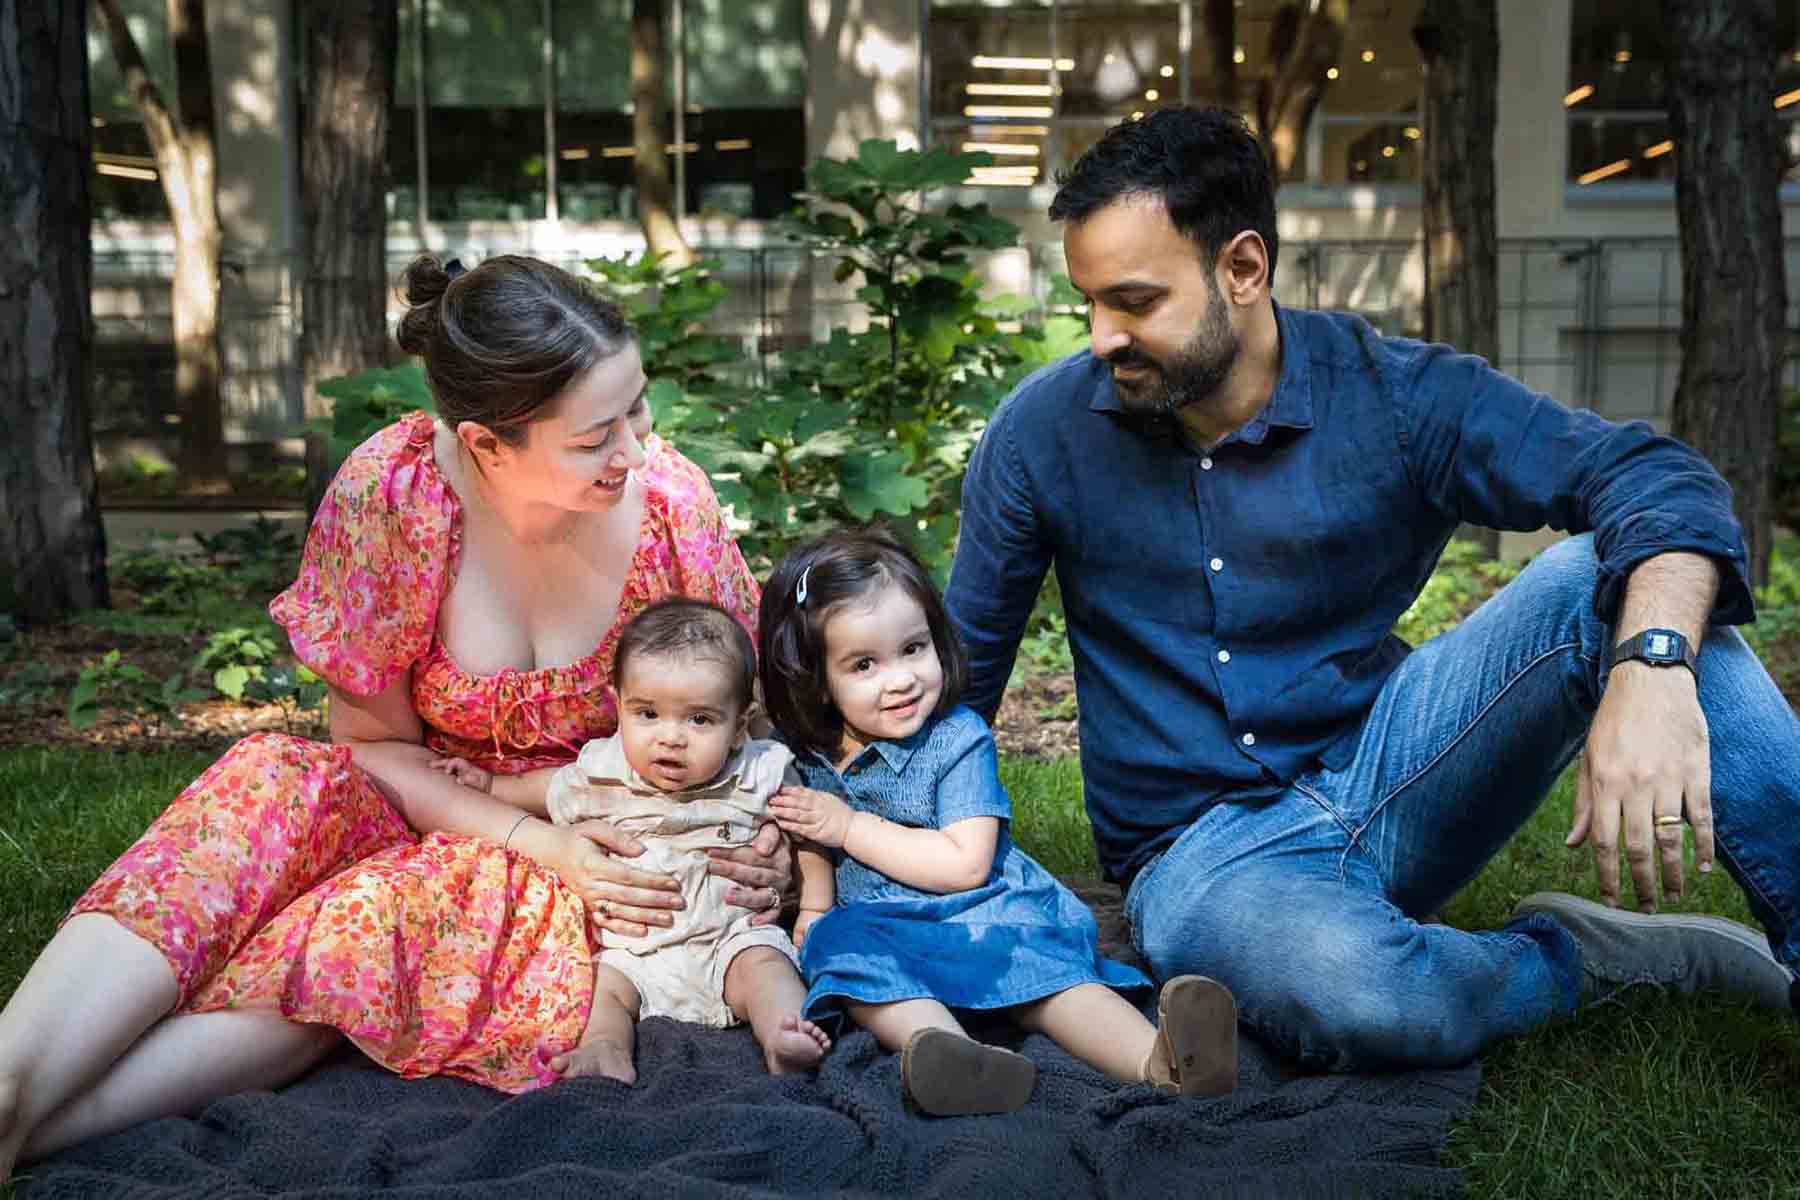 Parents sitting on gray blanket with baby girl and boy during a Brooklyn Commons family portrait session